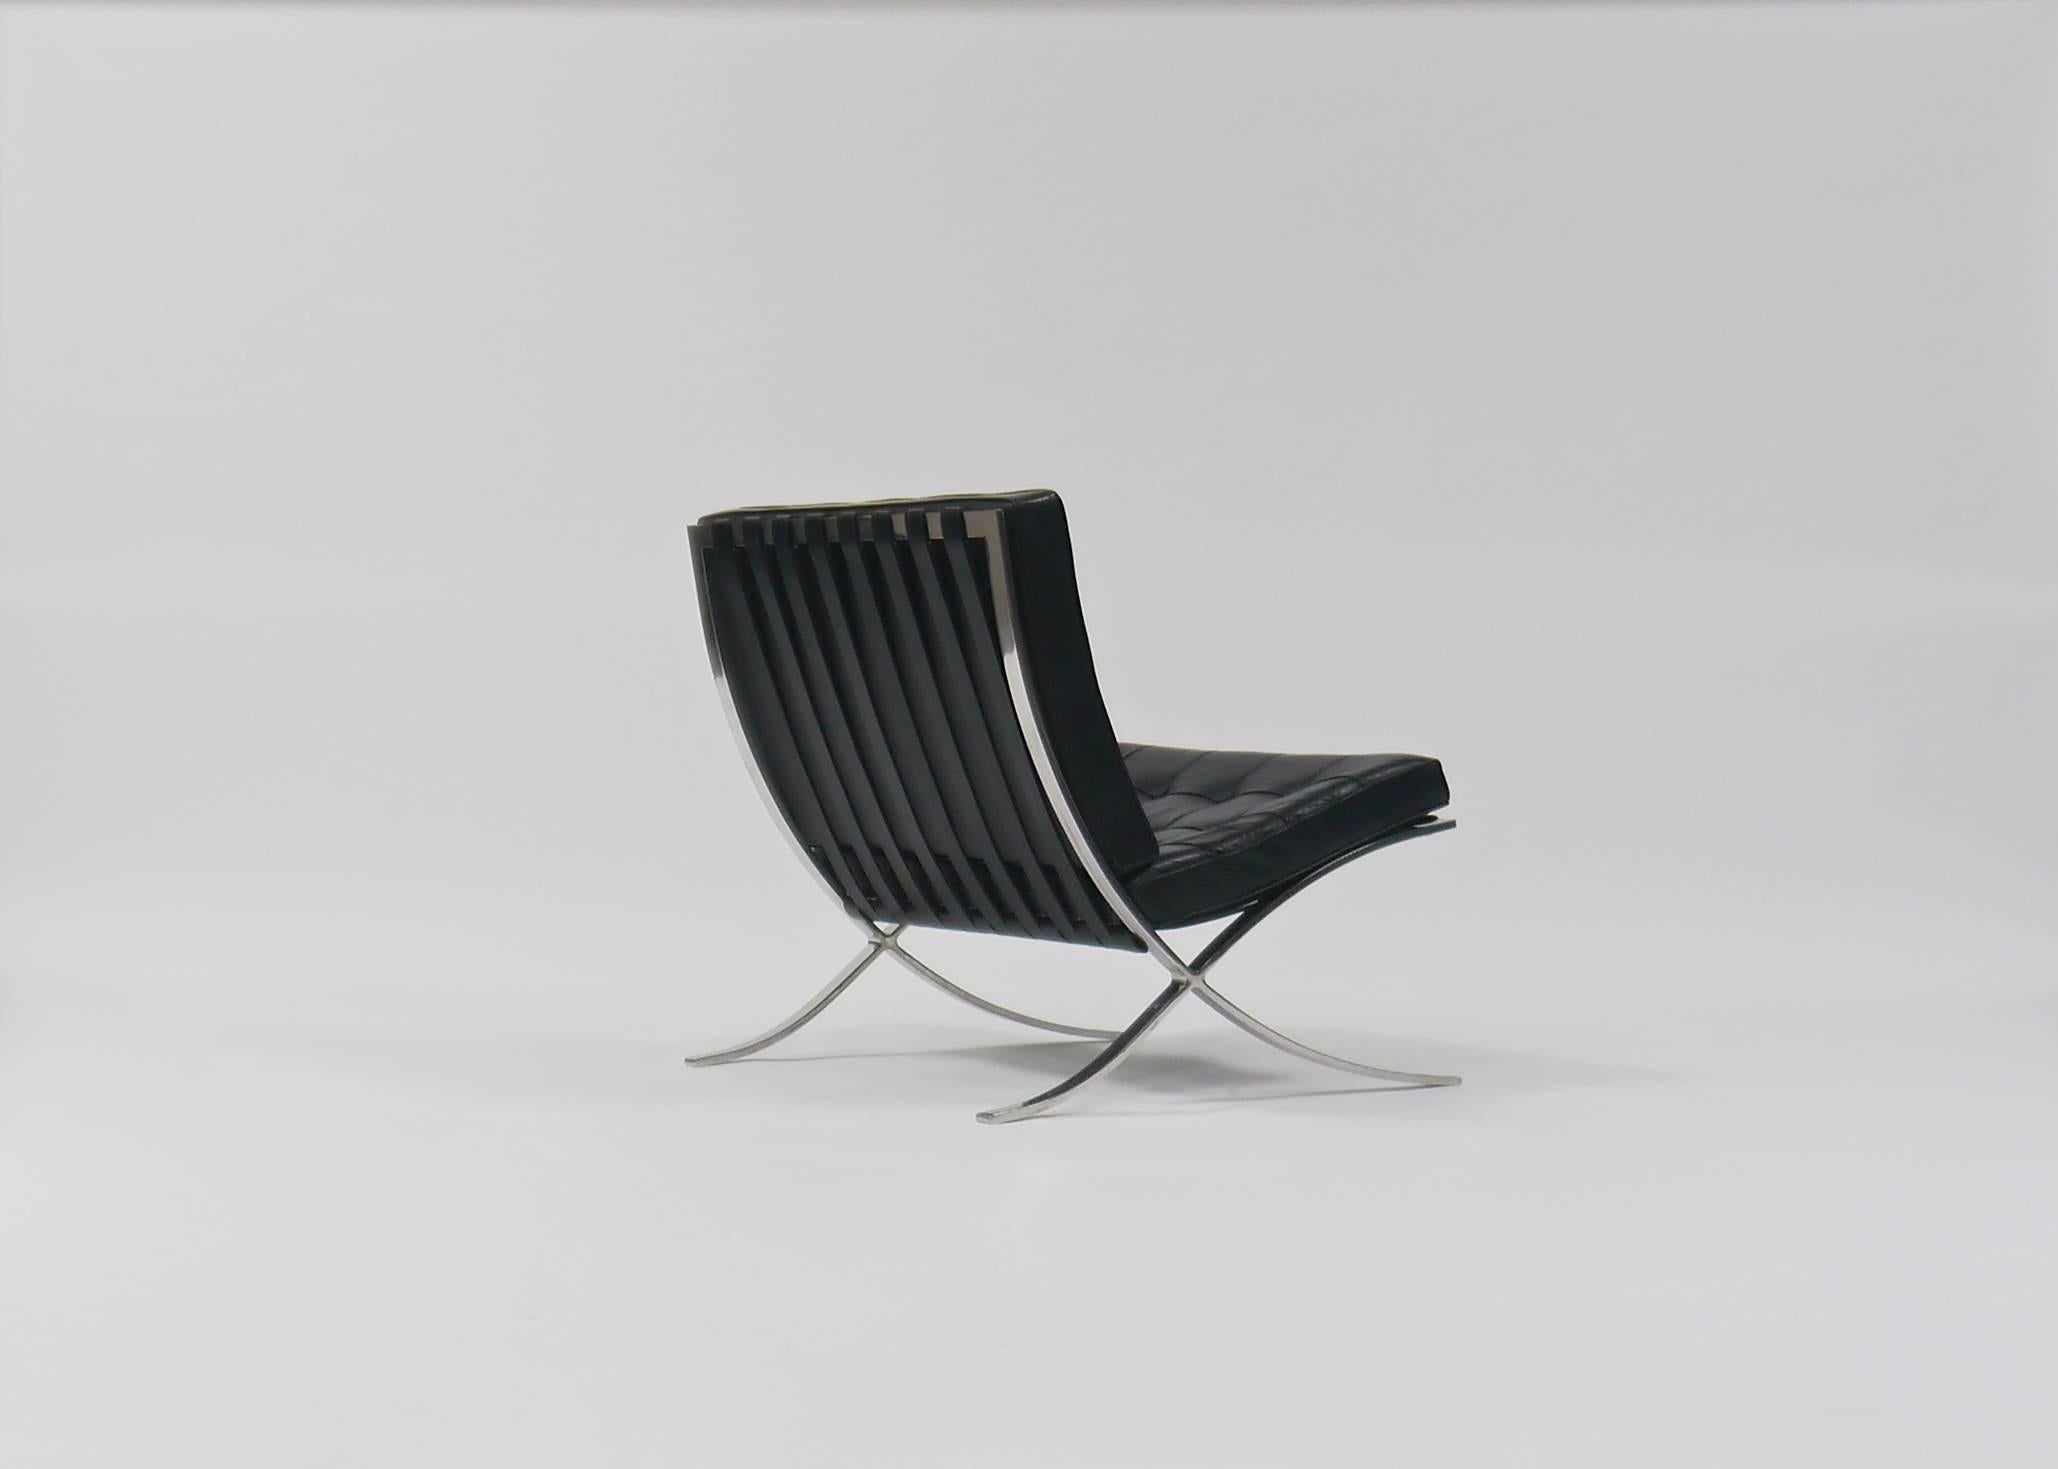 Pair of Barcelona chairs by Mies Van Der Rohe for Knoll. Stainless steel and black leather, circa 1975.